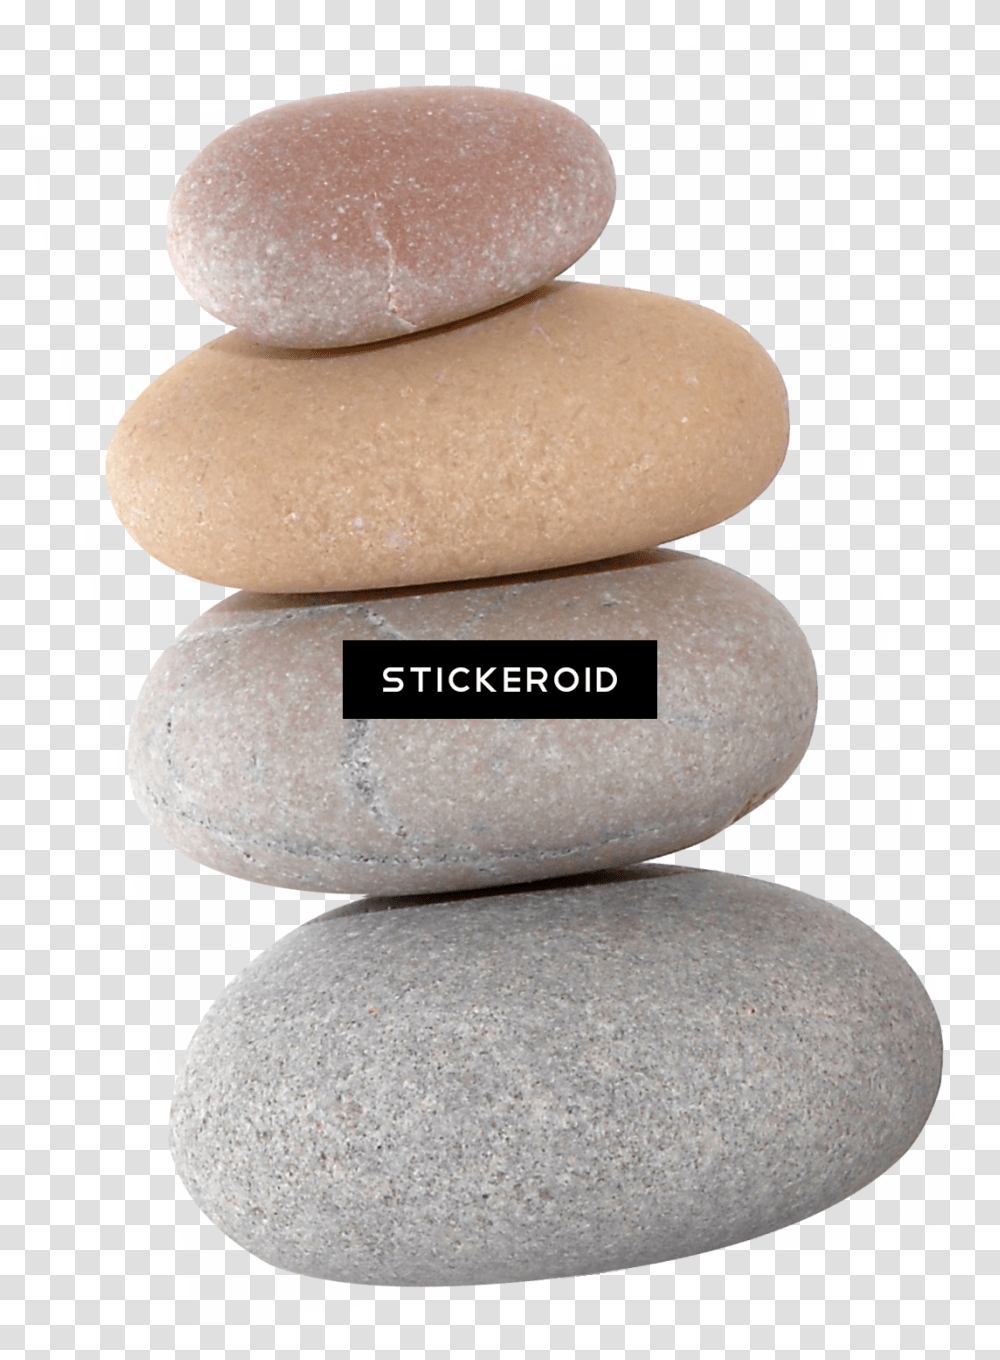 Stone And Rocks Stones Pebble, Bread, Food Transparent Png